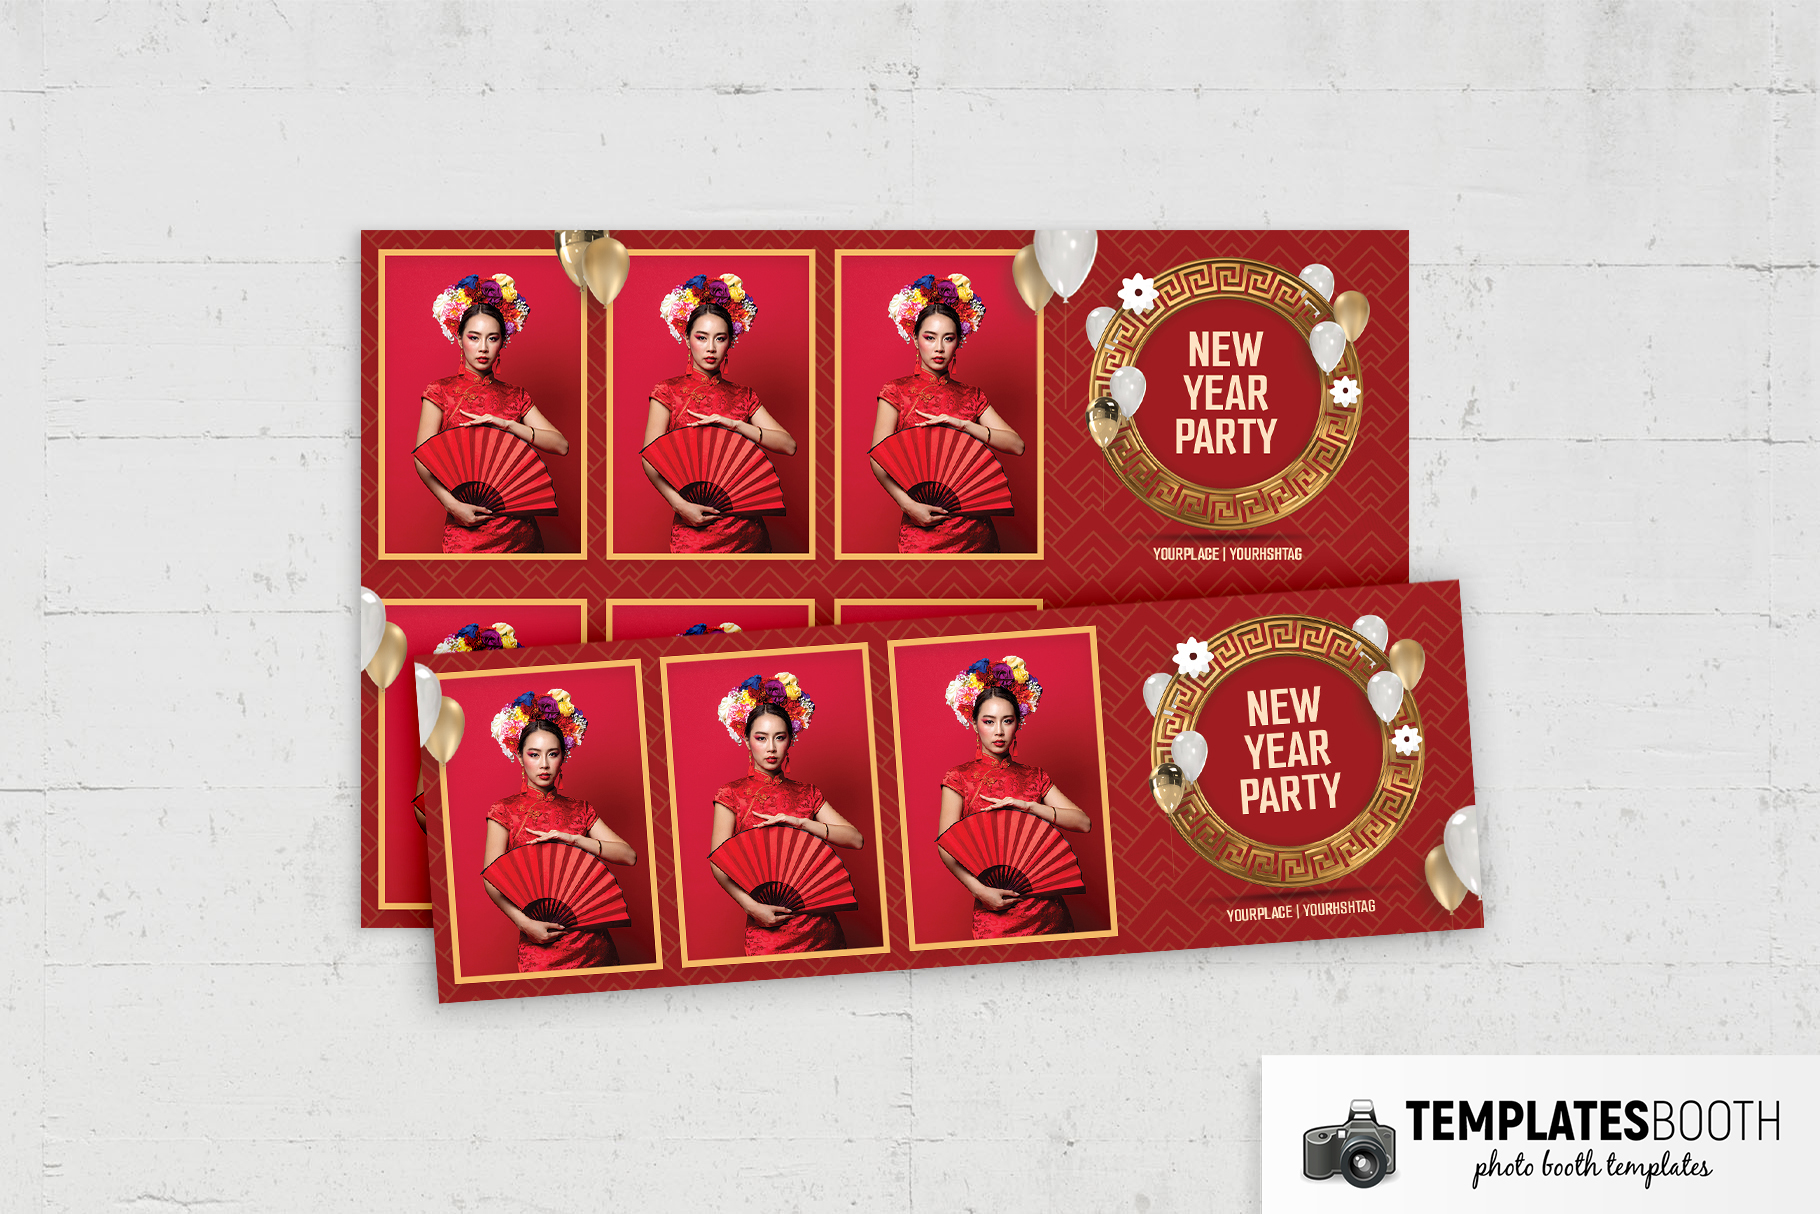 Chinese New Year Photo Booth Template